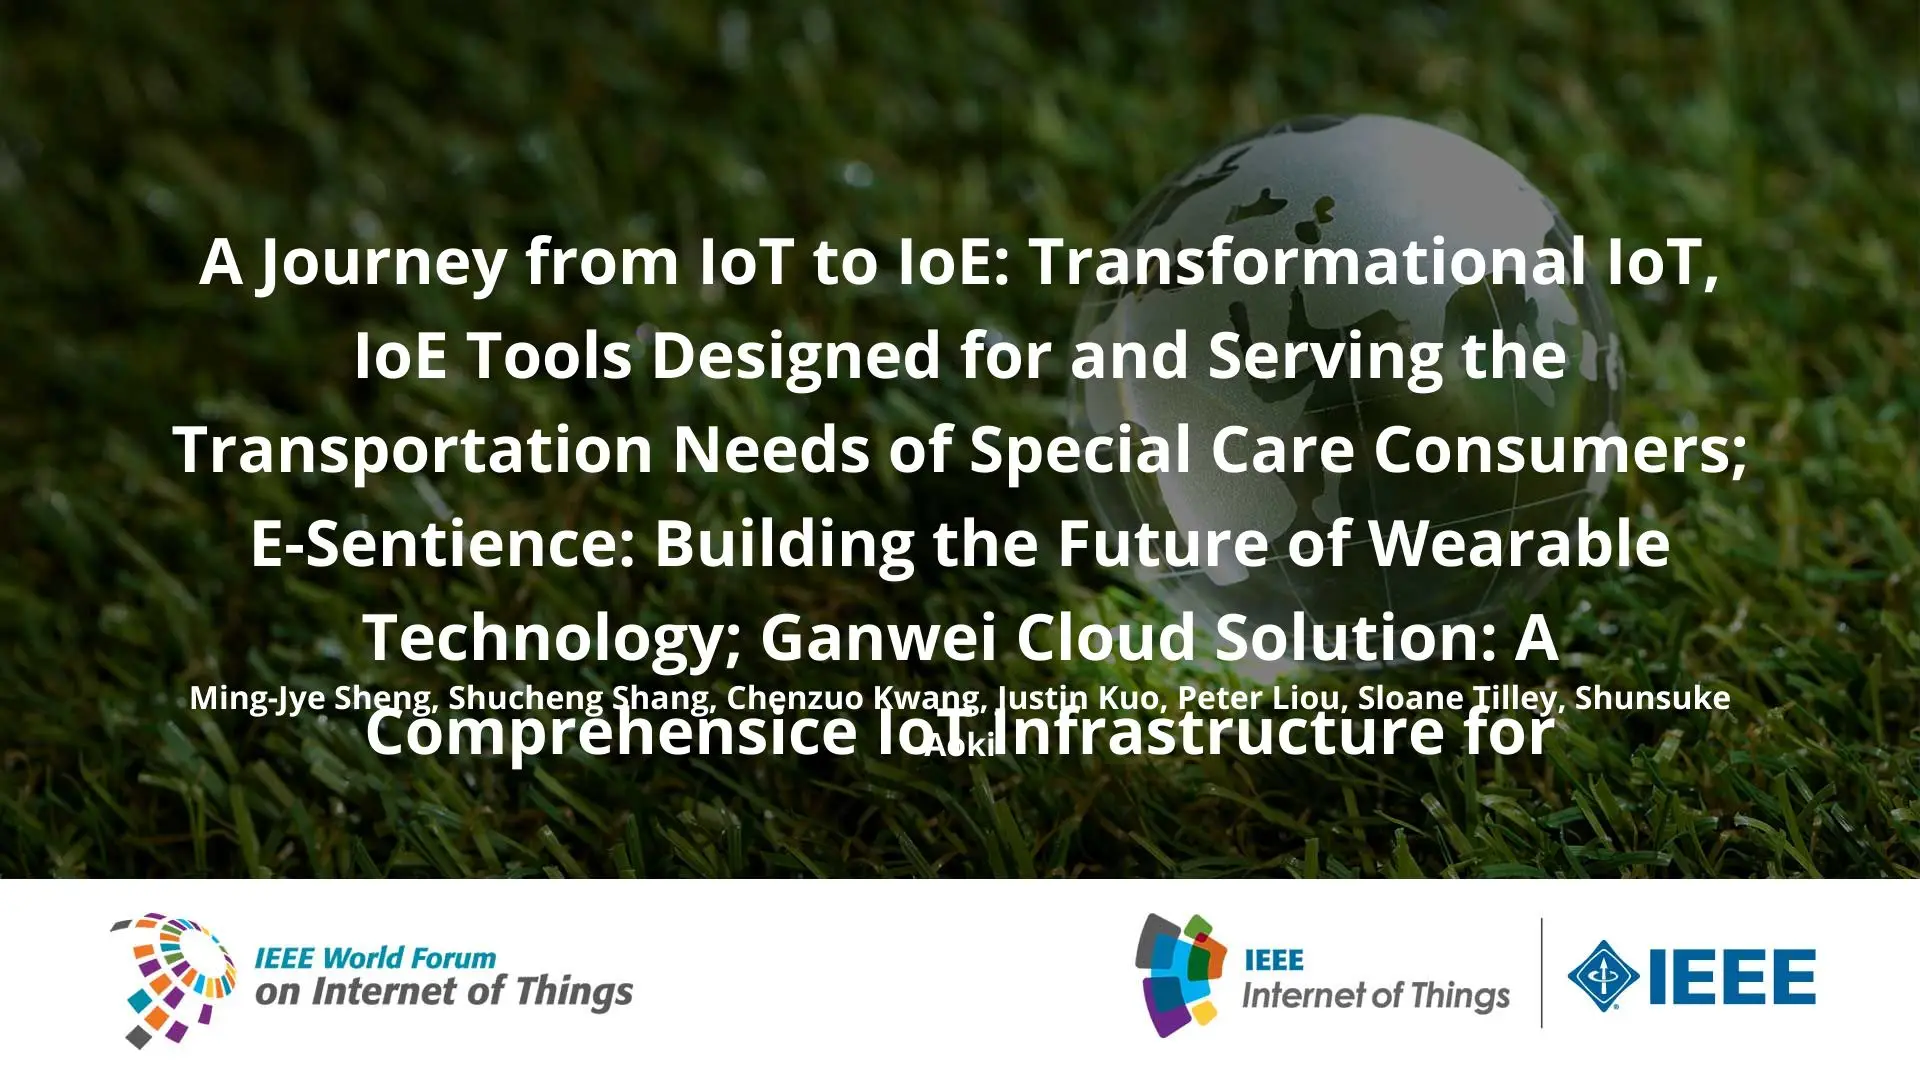 A Journey from IoT to IoE: Transformational IoT, IoE Tools Designed for and Serving the Transportation Needs of Special Care Consumers; E-Sentience: Building the Future of Wearable Technology; Ganwei Cloud Solution: A Comprehensice IoT Infrastructure for